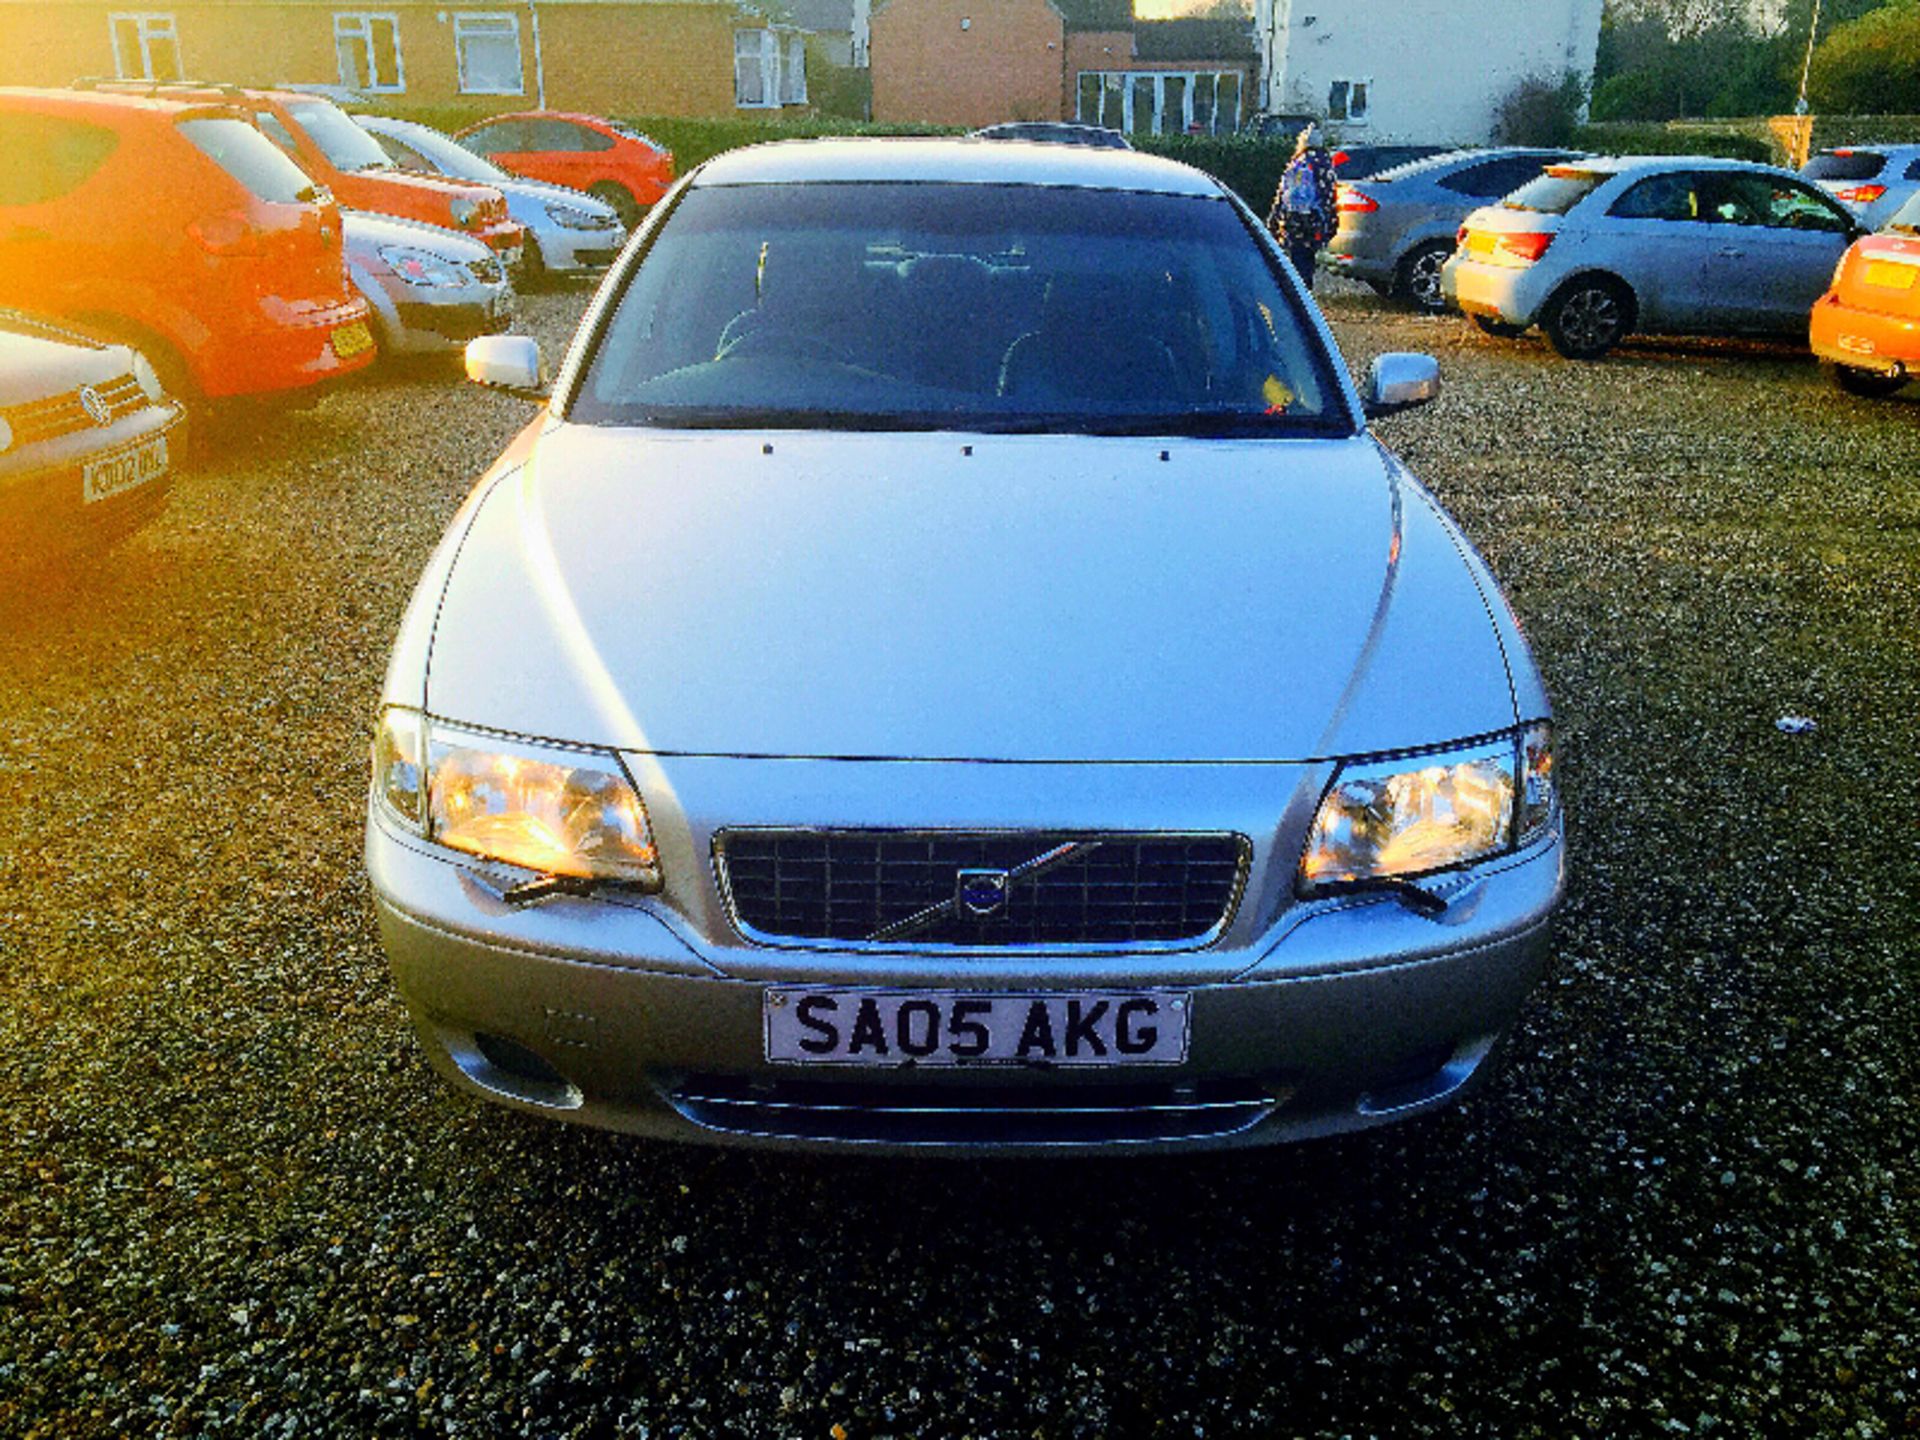 (On Sale) VOLVO S80 SE 2.4 D5 AUTO 2005(05) REG**METALLIC SILVER**A/C*CLIMATE CONTROL*FULL LEATHER* - Image 3 of 17